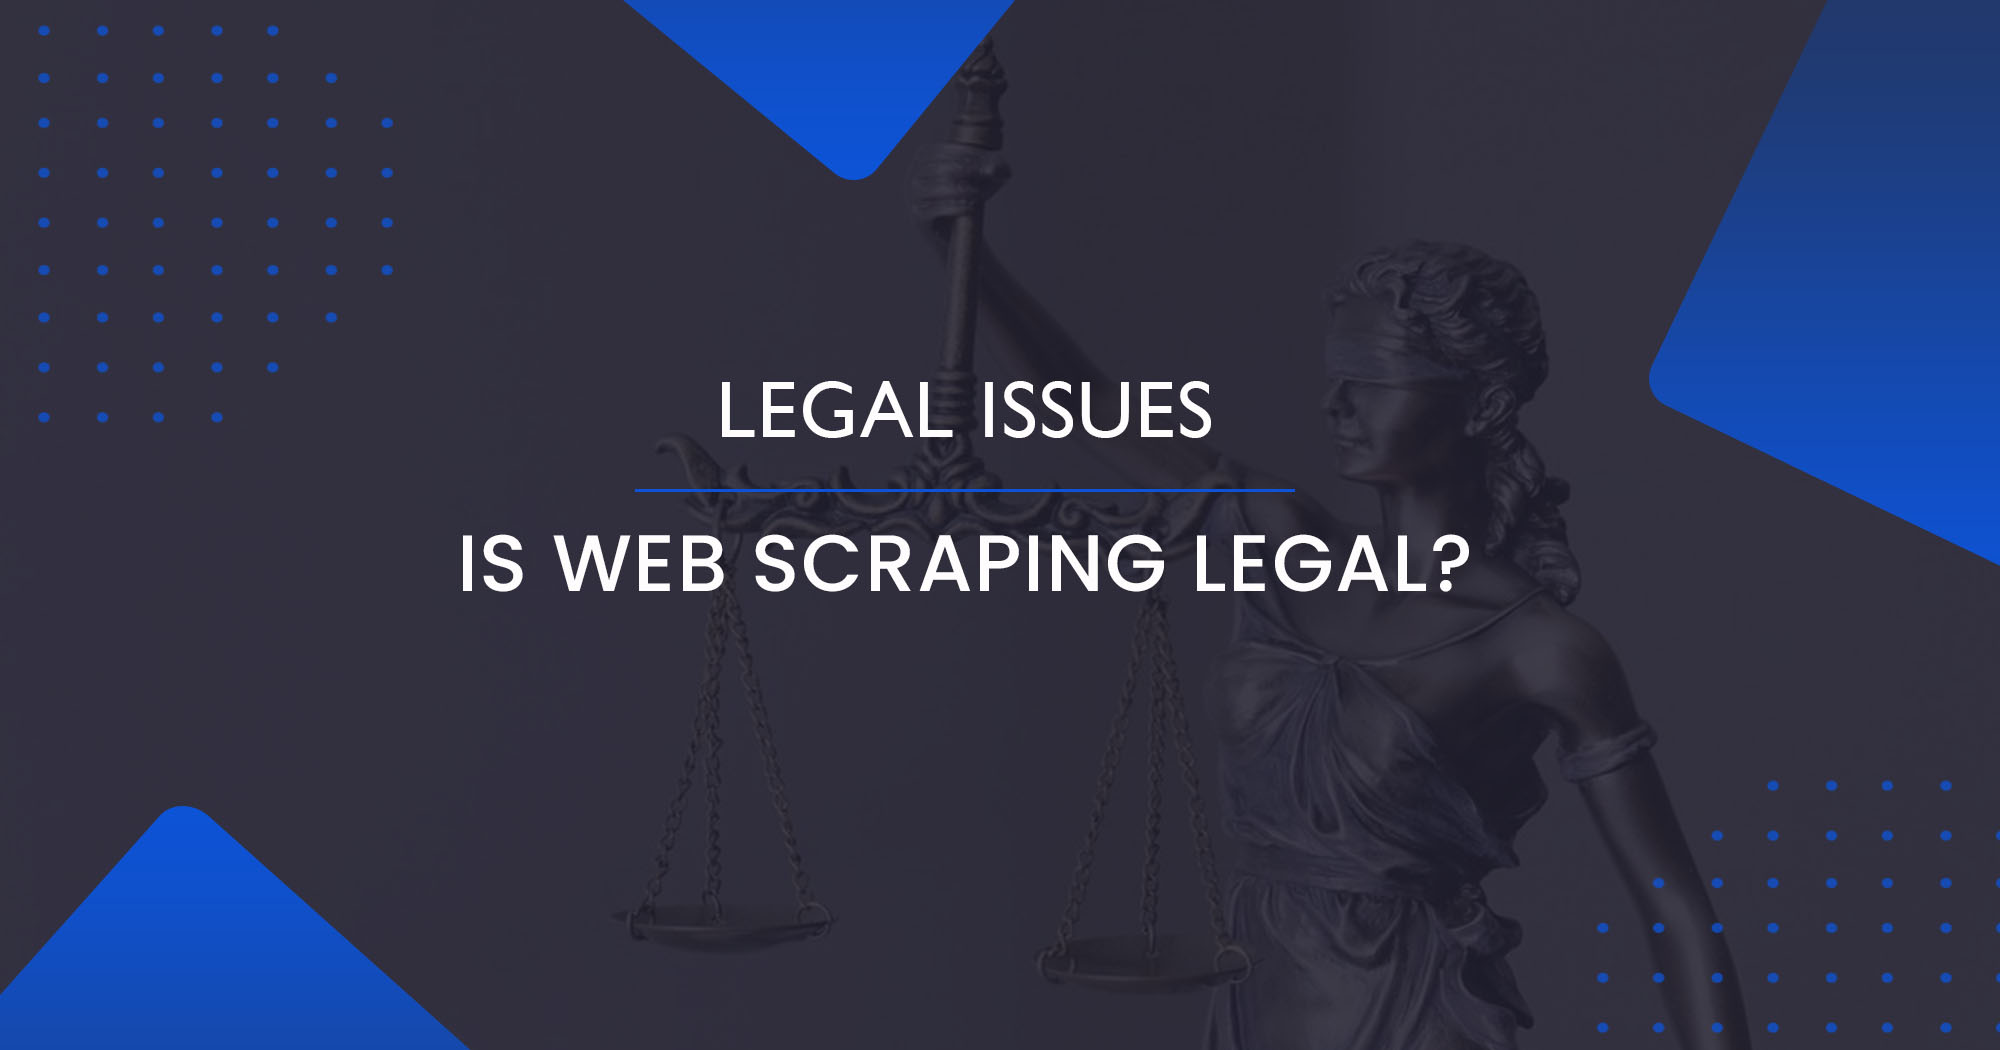 State of Web Scraping 2022: Web Scraping Legal Issues